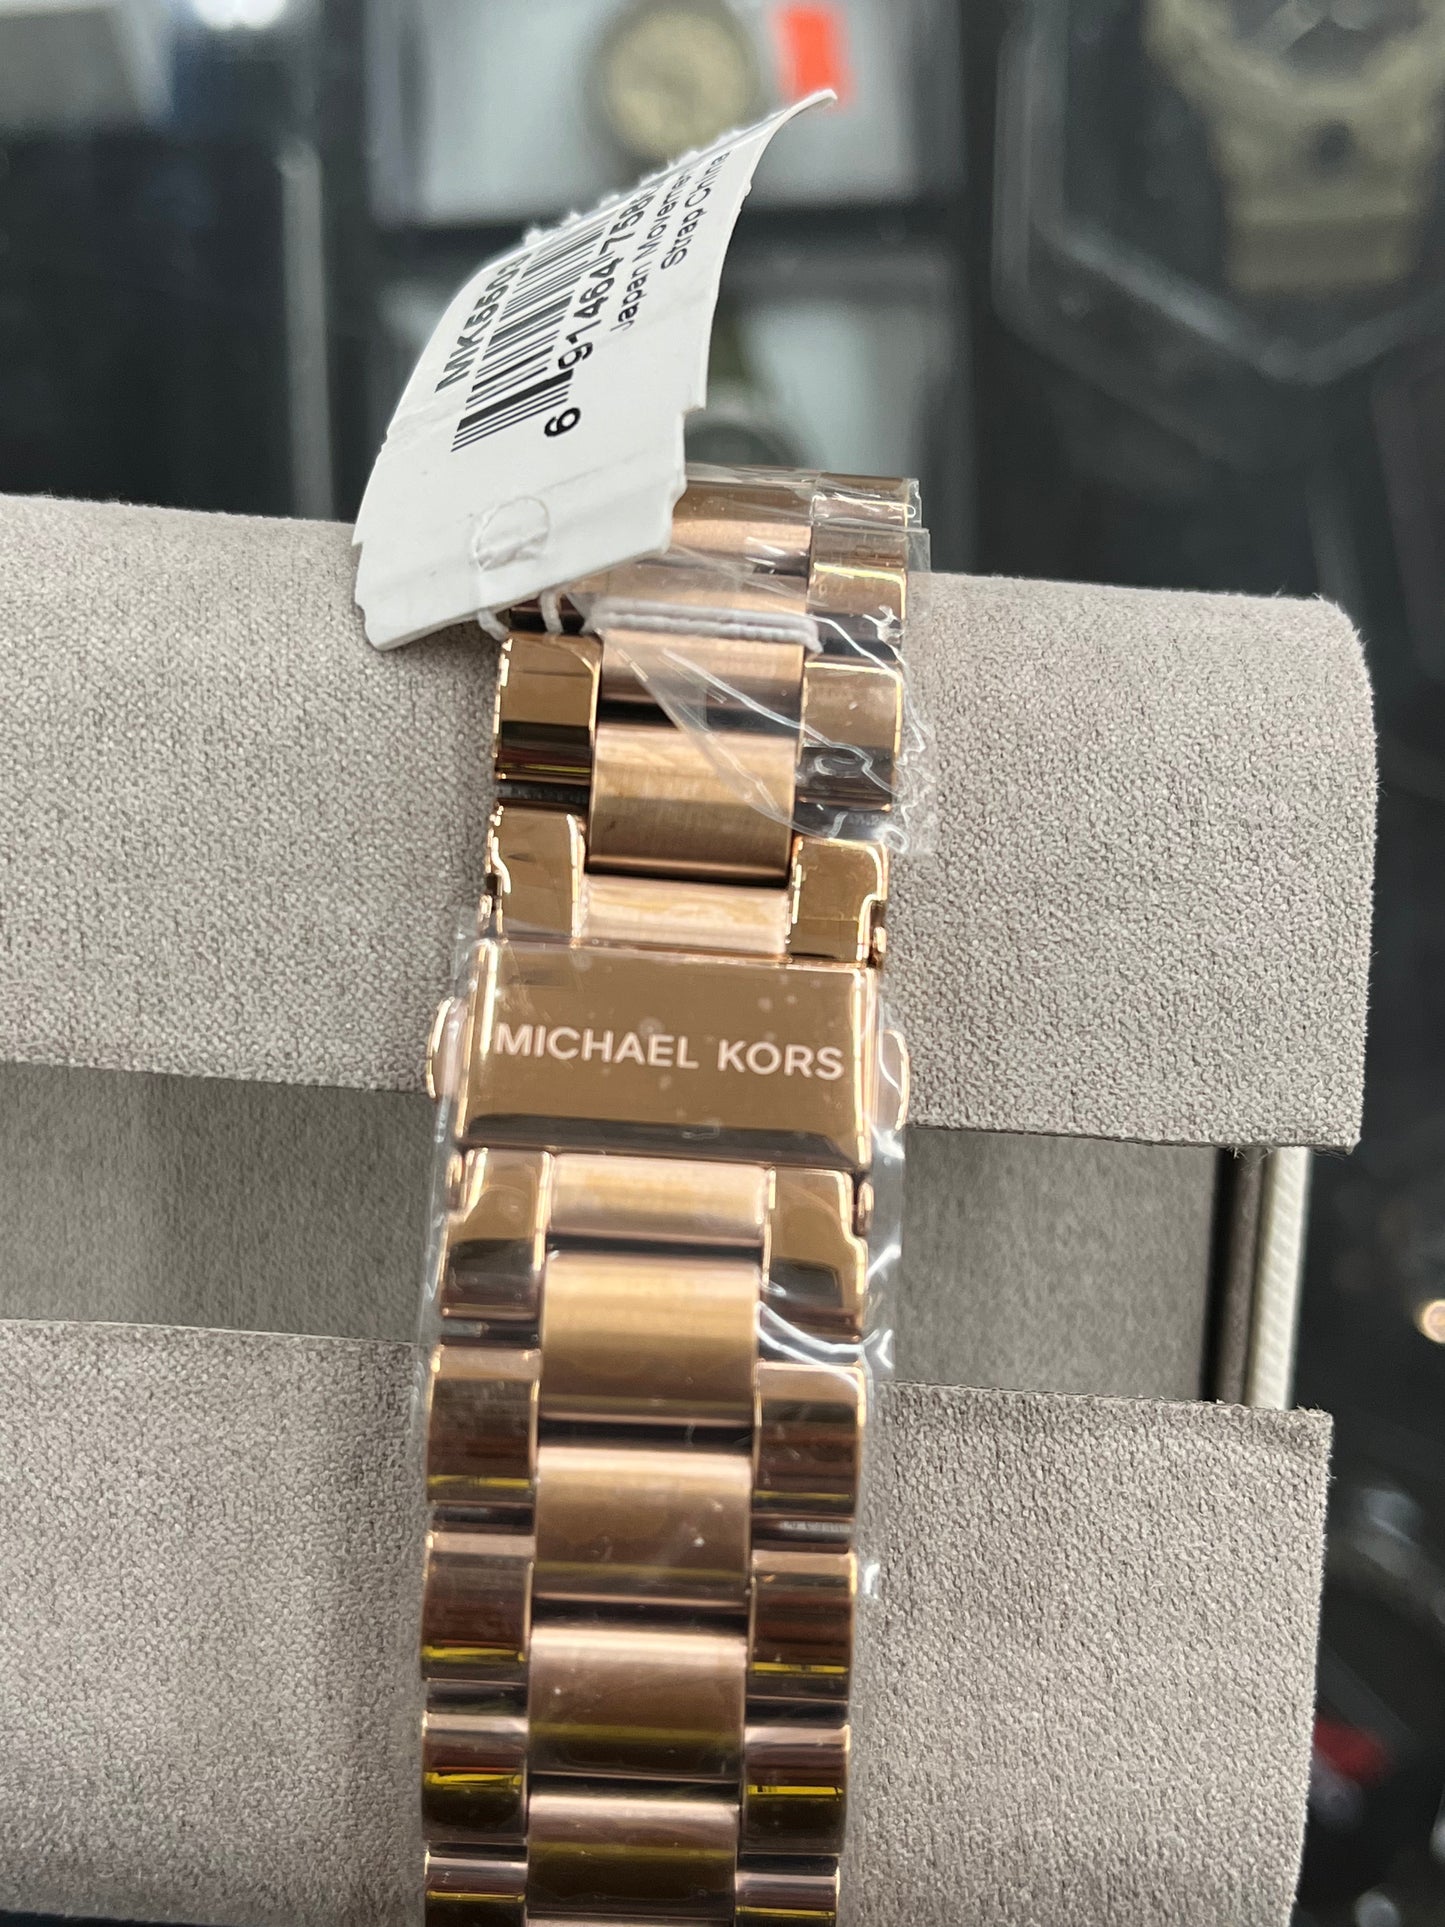 Michael Kors Bradshaw Women's Watch, Stainless Steel Rose Gold Chronograph Watch for Women with Steel